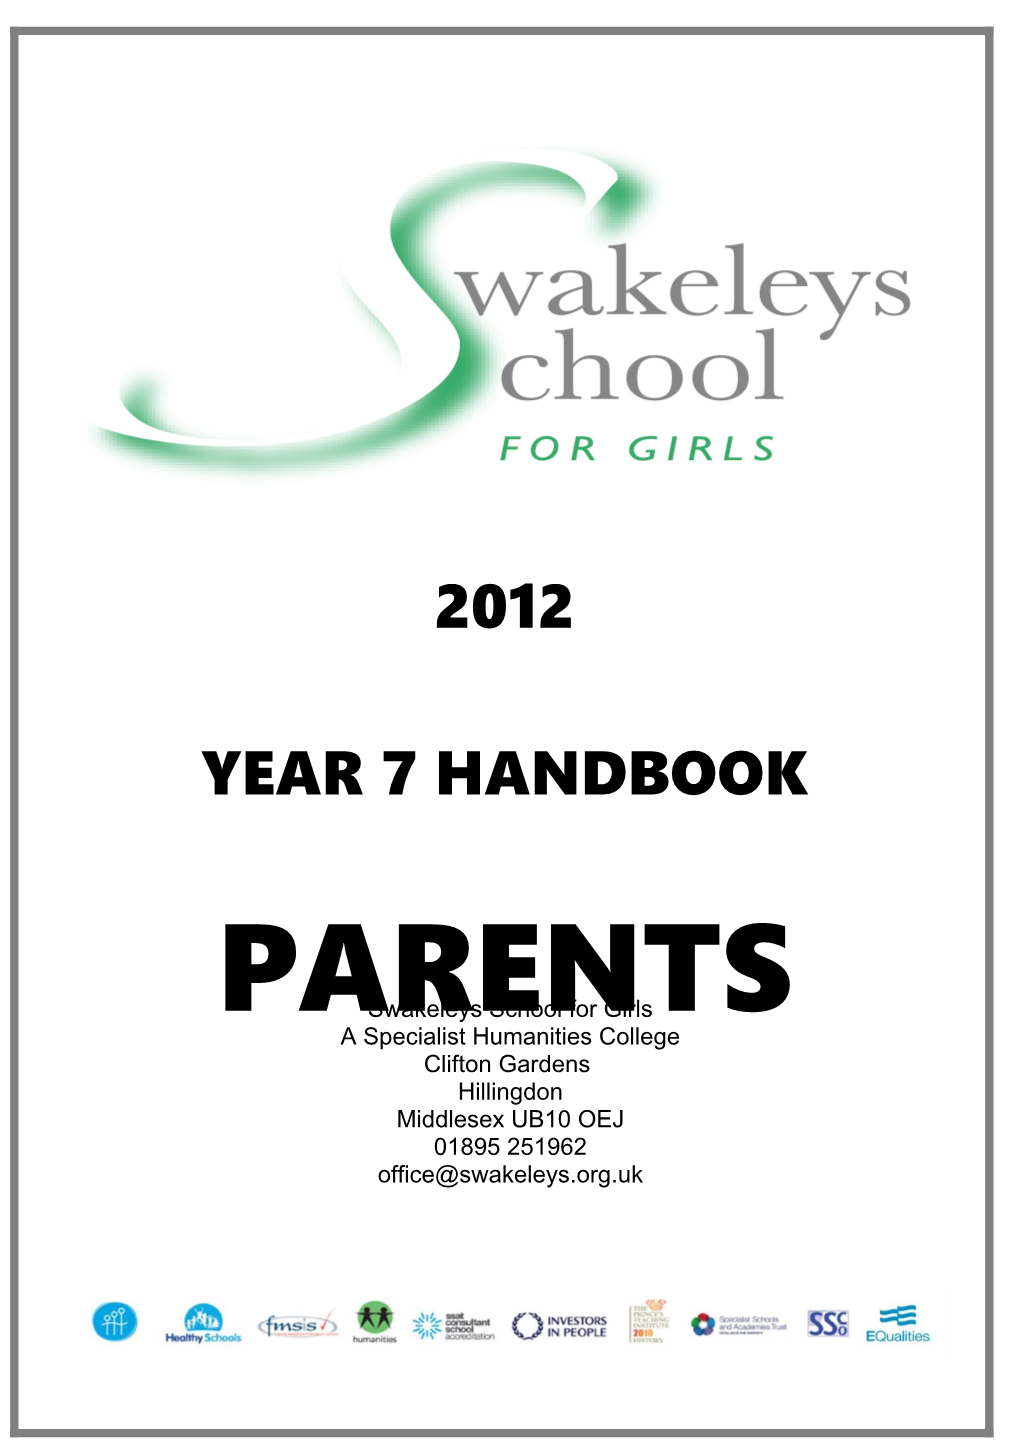 Welcome to Swakeleys School. I Hope Your Daughter Will Be Happy and Successful Here, And